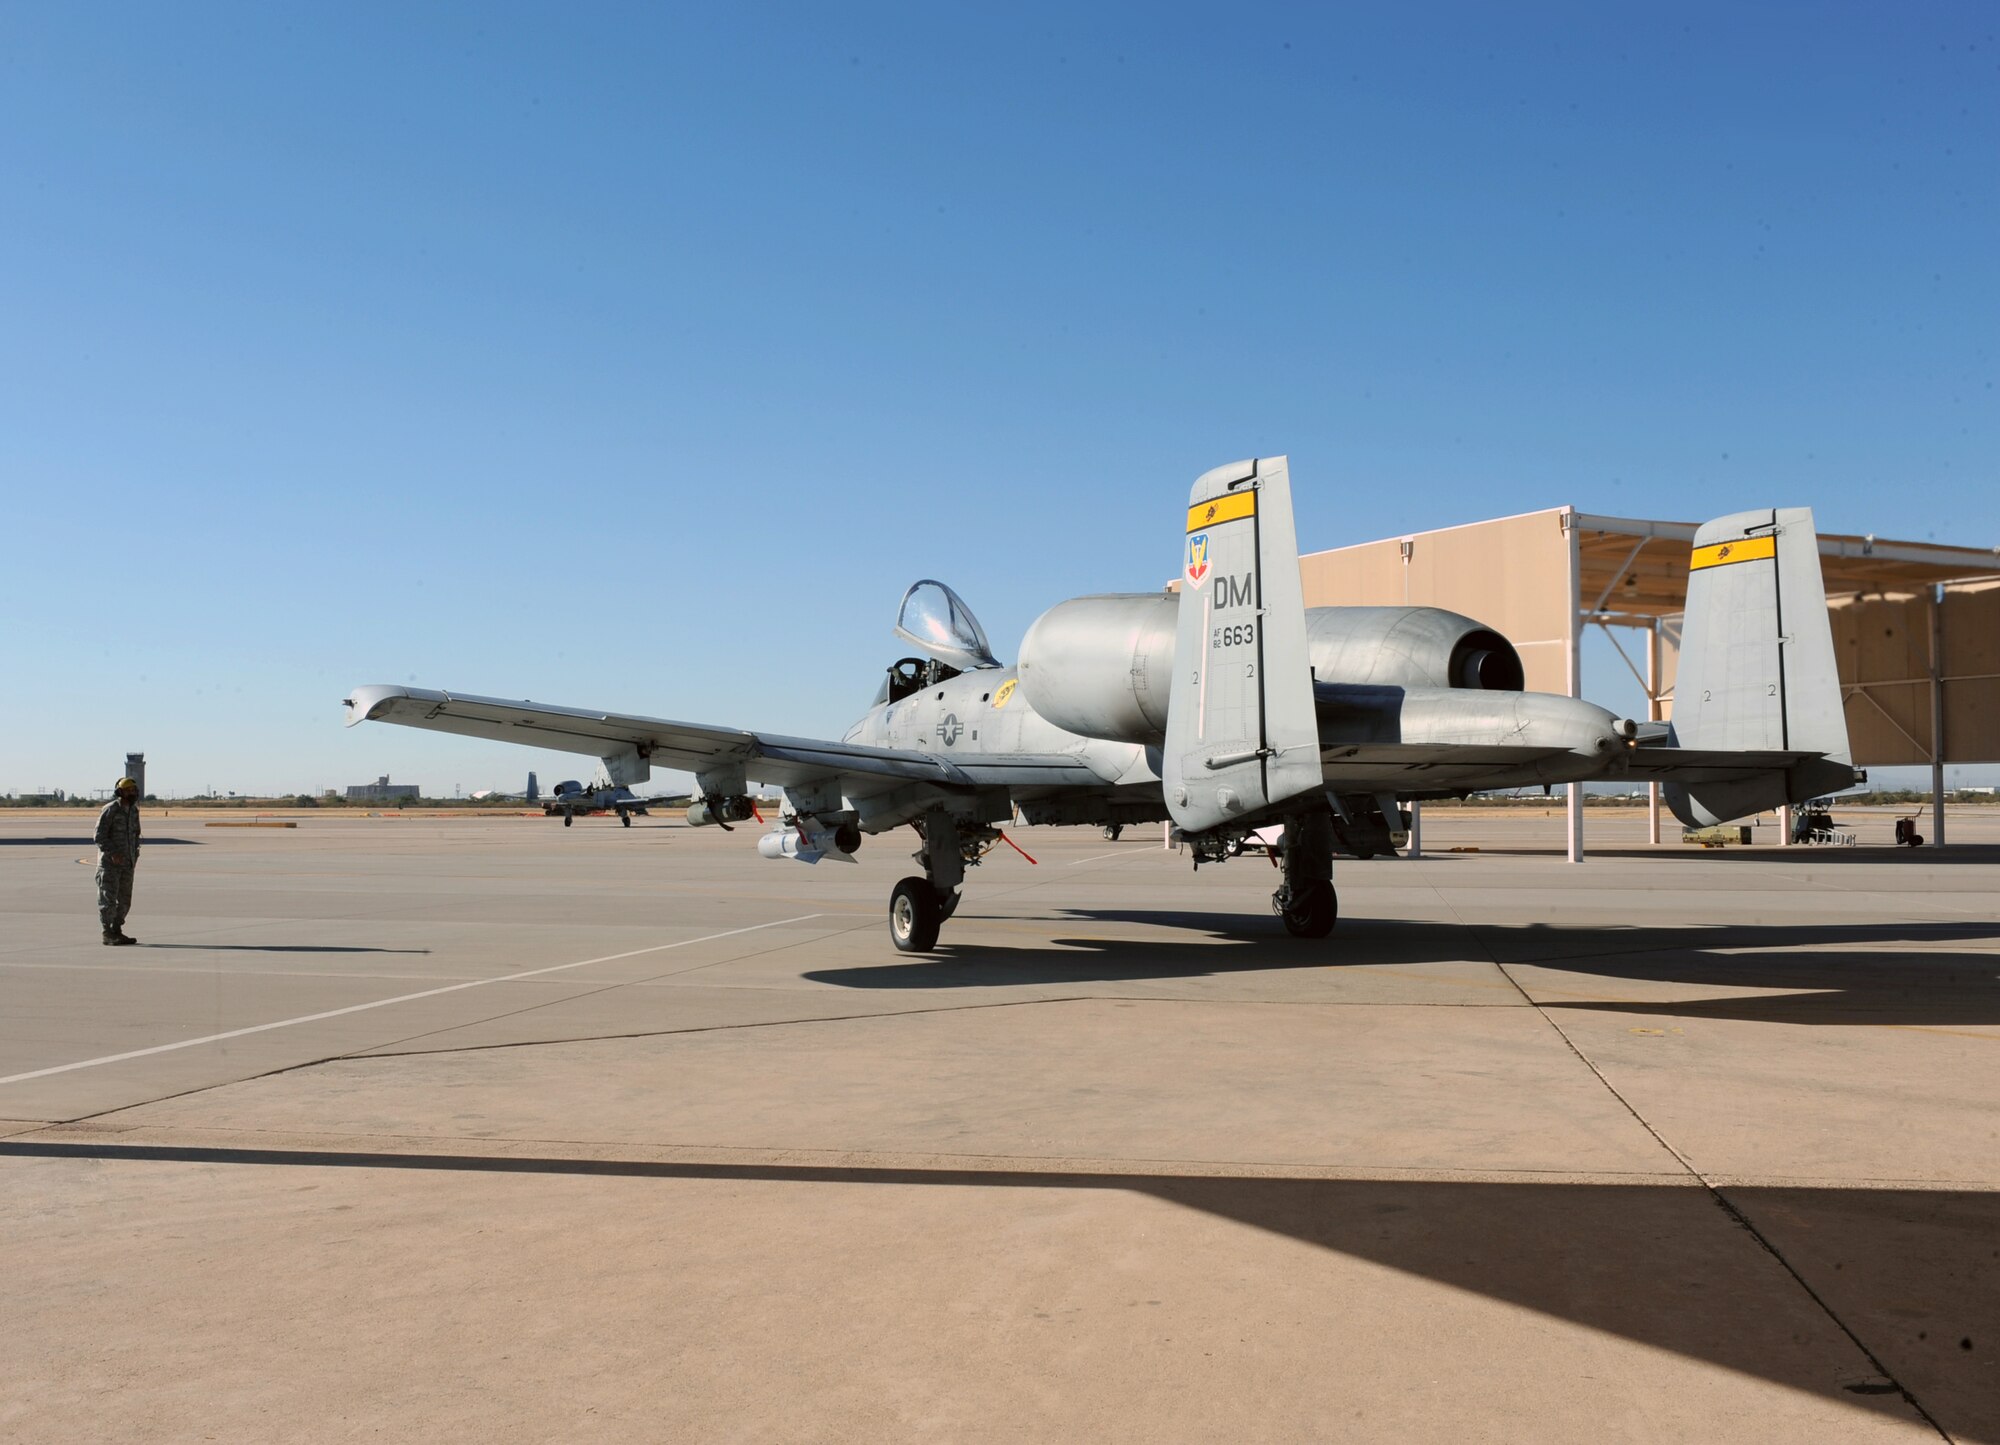 U.S. Air Force 1st Lt. Eric Calvey, 357th Fighter Squadron, taxis of the flightline on Davis-Monthan Air Force Base, Ariz., Nov 7, 2012. The 357th FS mission is to train pilots to plan, coordinate, execute, and control day and night close air support, battlefield surveillance and reconnaissance in support of friendly ground forces. (U.S. Air Force photo by Airman 1st Class Christine Griffiths/Released)